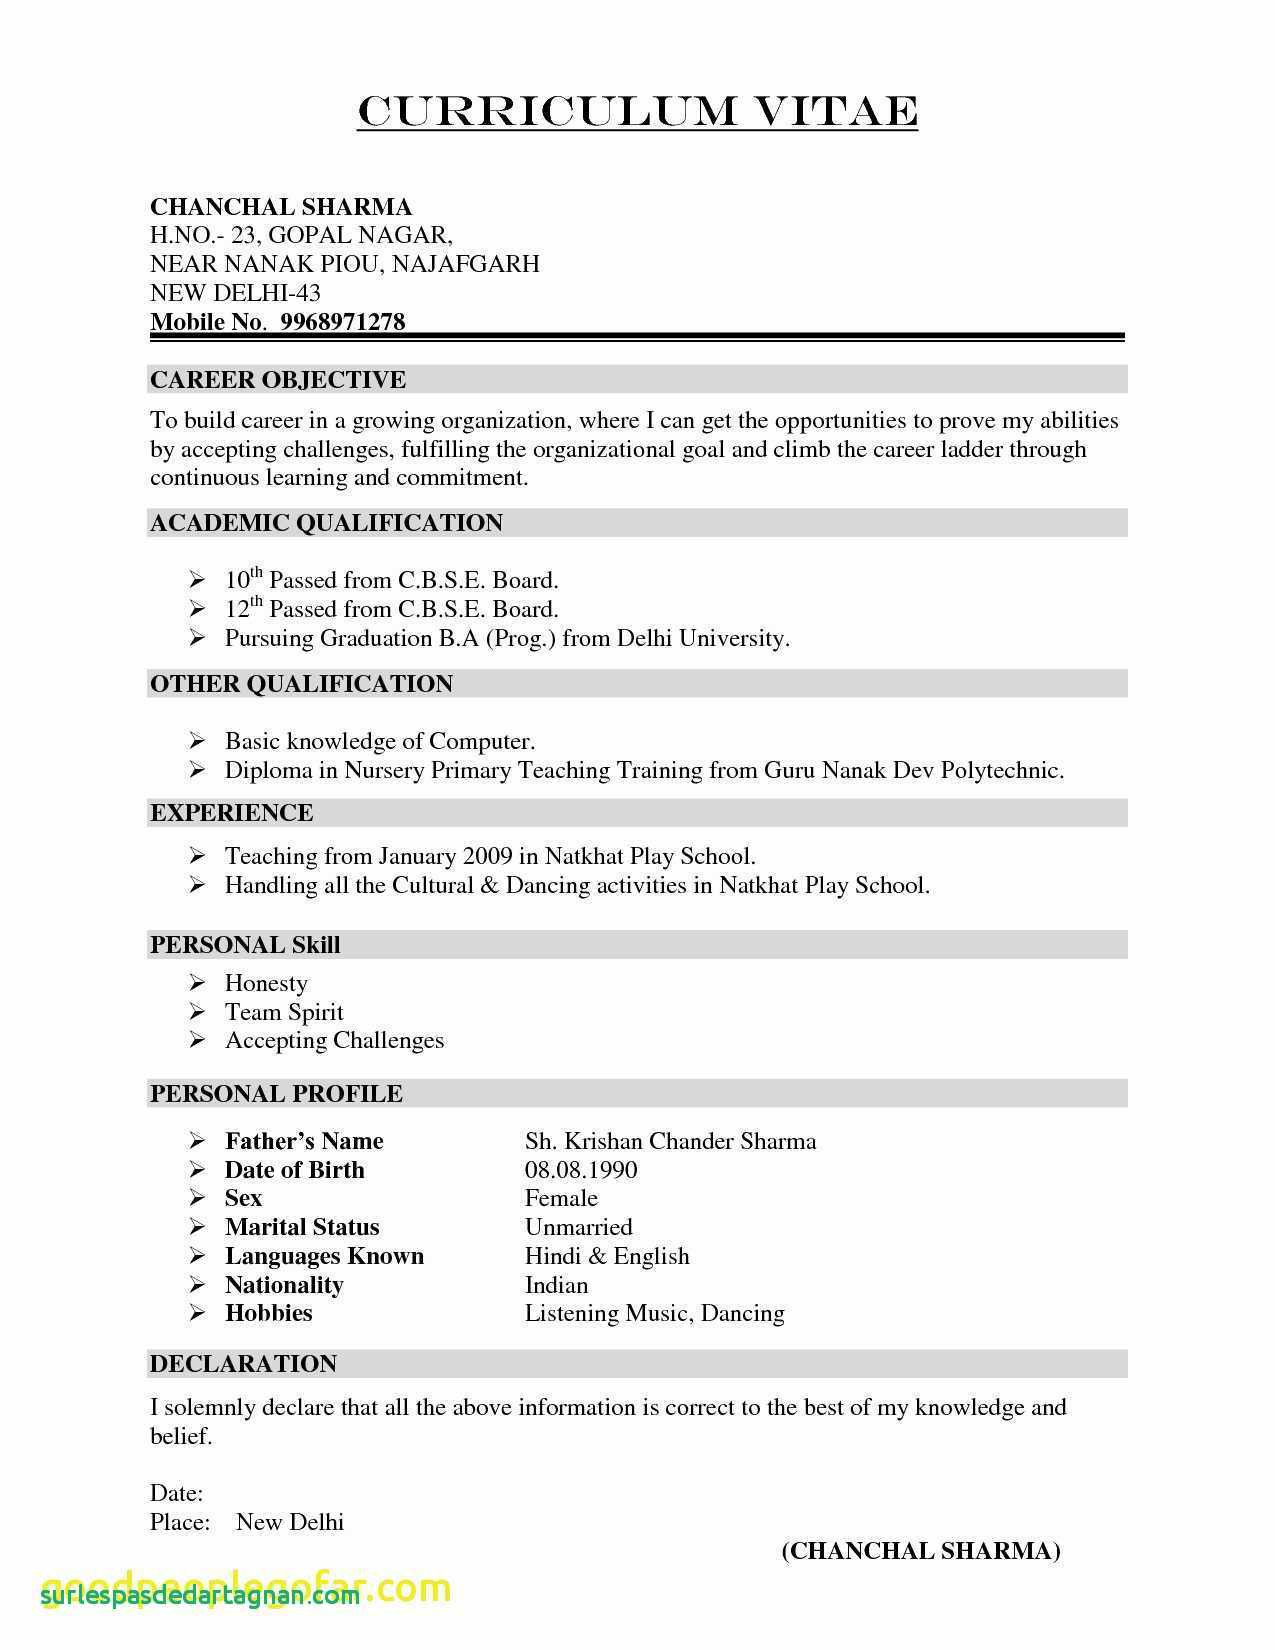 Resume Follow Up Letter Template - Follow Up Letter Sample Unique Bill Sales Template for Car or Used